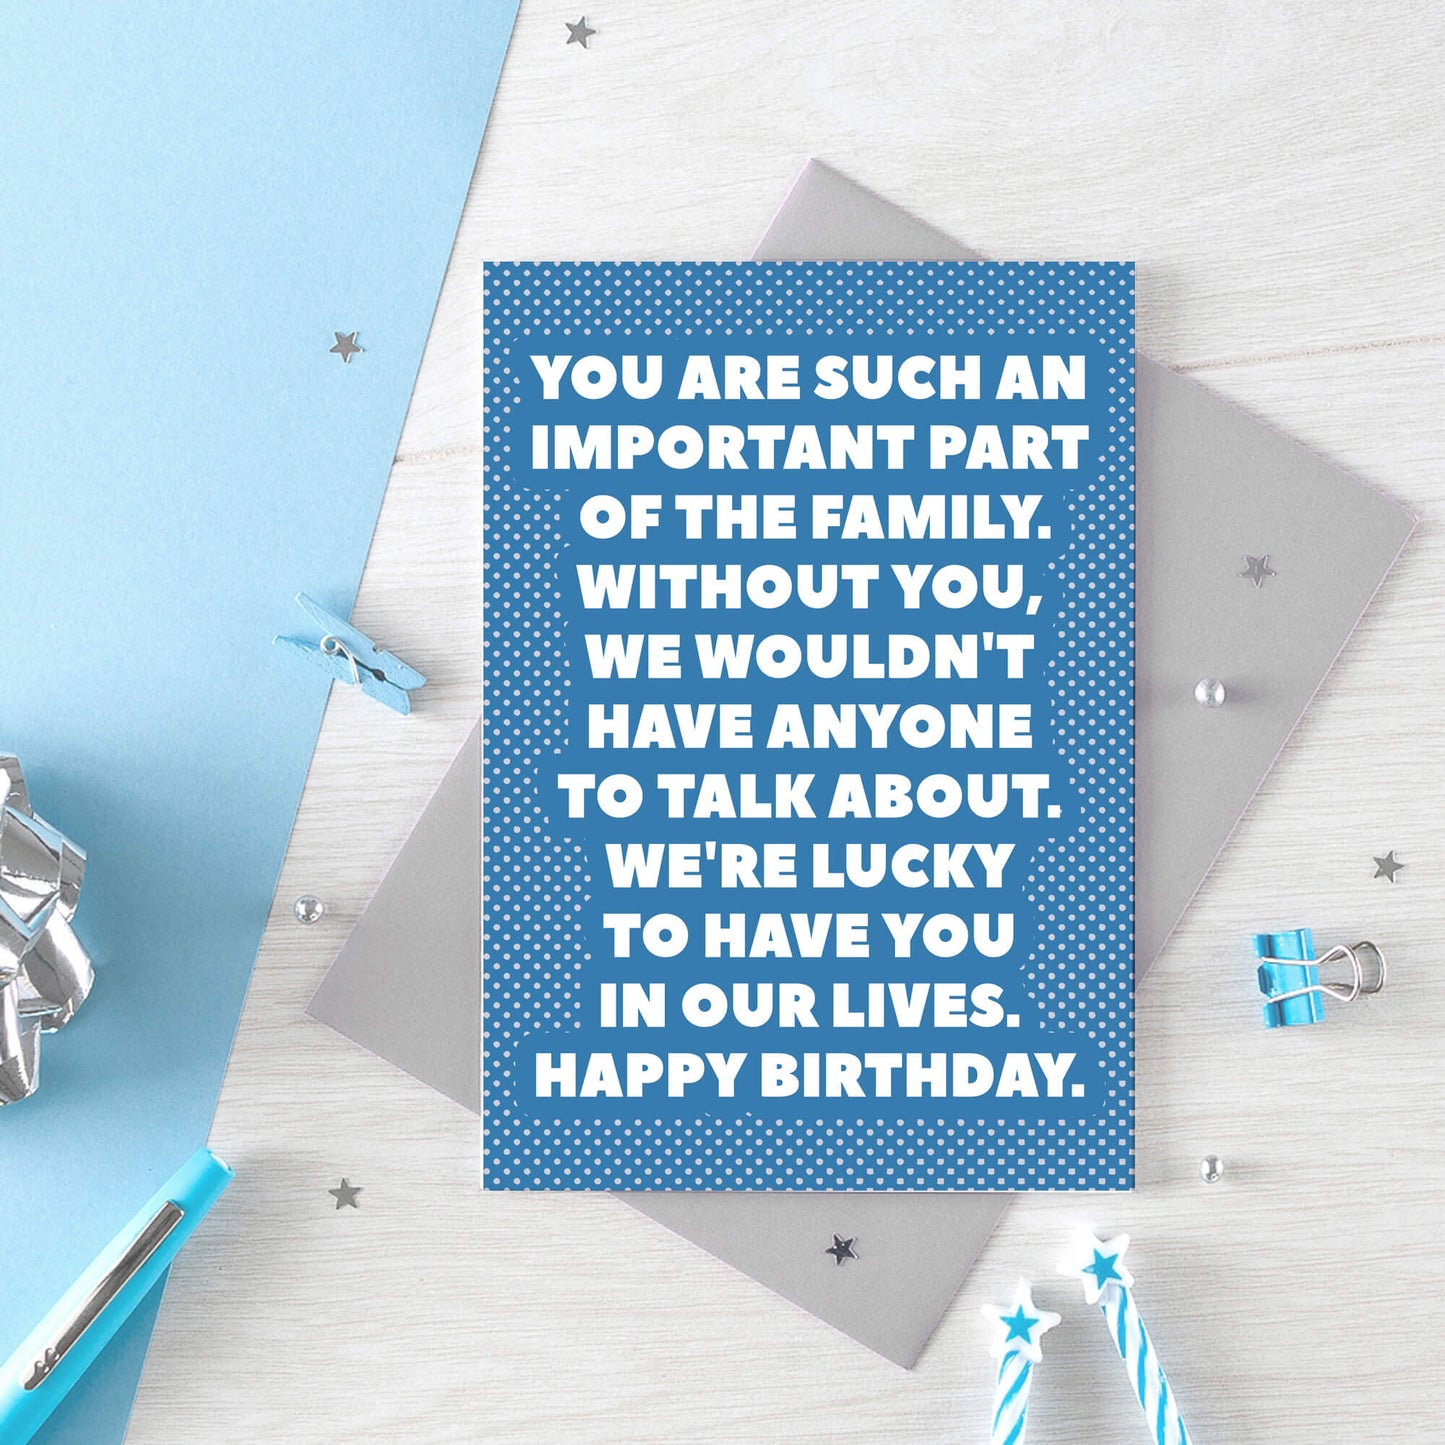 Birthday Card by SixElevenCreations. Reads You are such an important part of the family. Without you, we wouldn't have anyone to talk about. We're lucky to have you in our lives. Happy birthday. Product Code SE2707A6